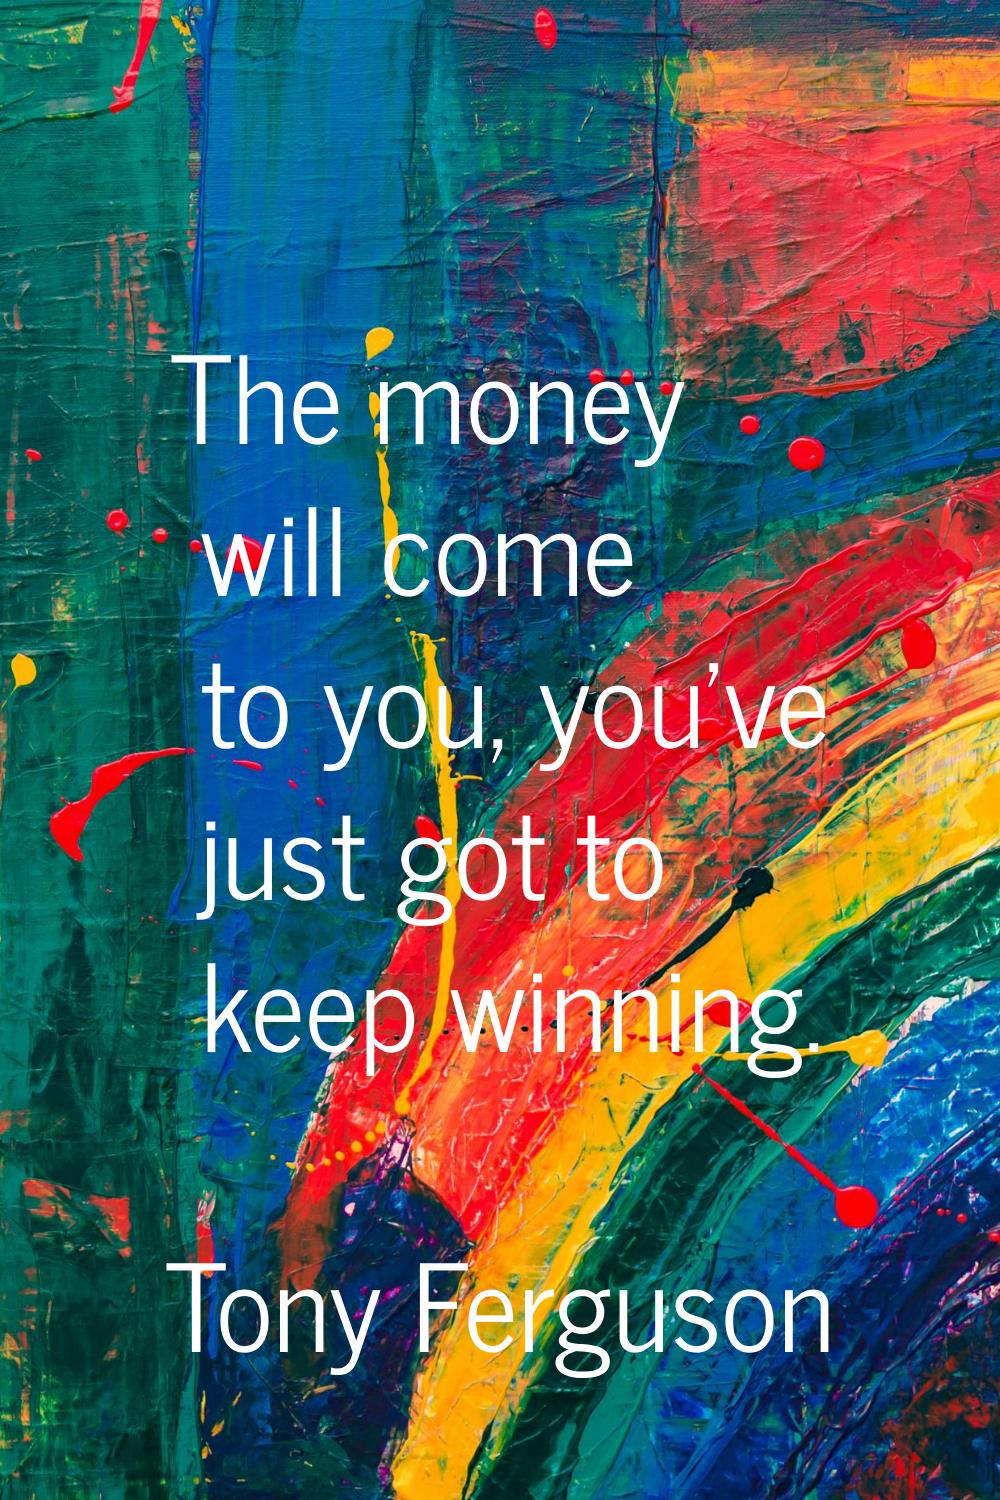 The money will come to you, you've just got to keep winning.